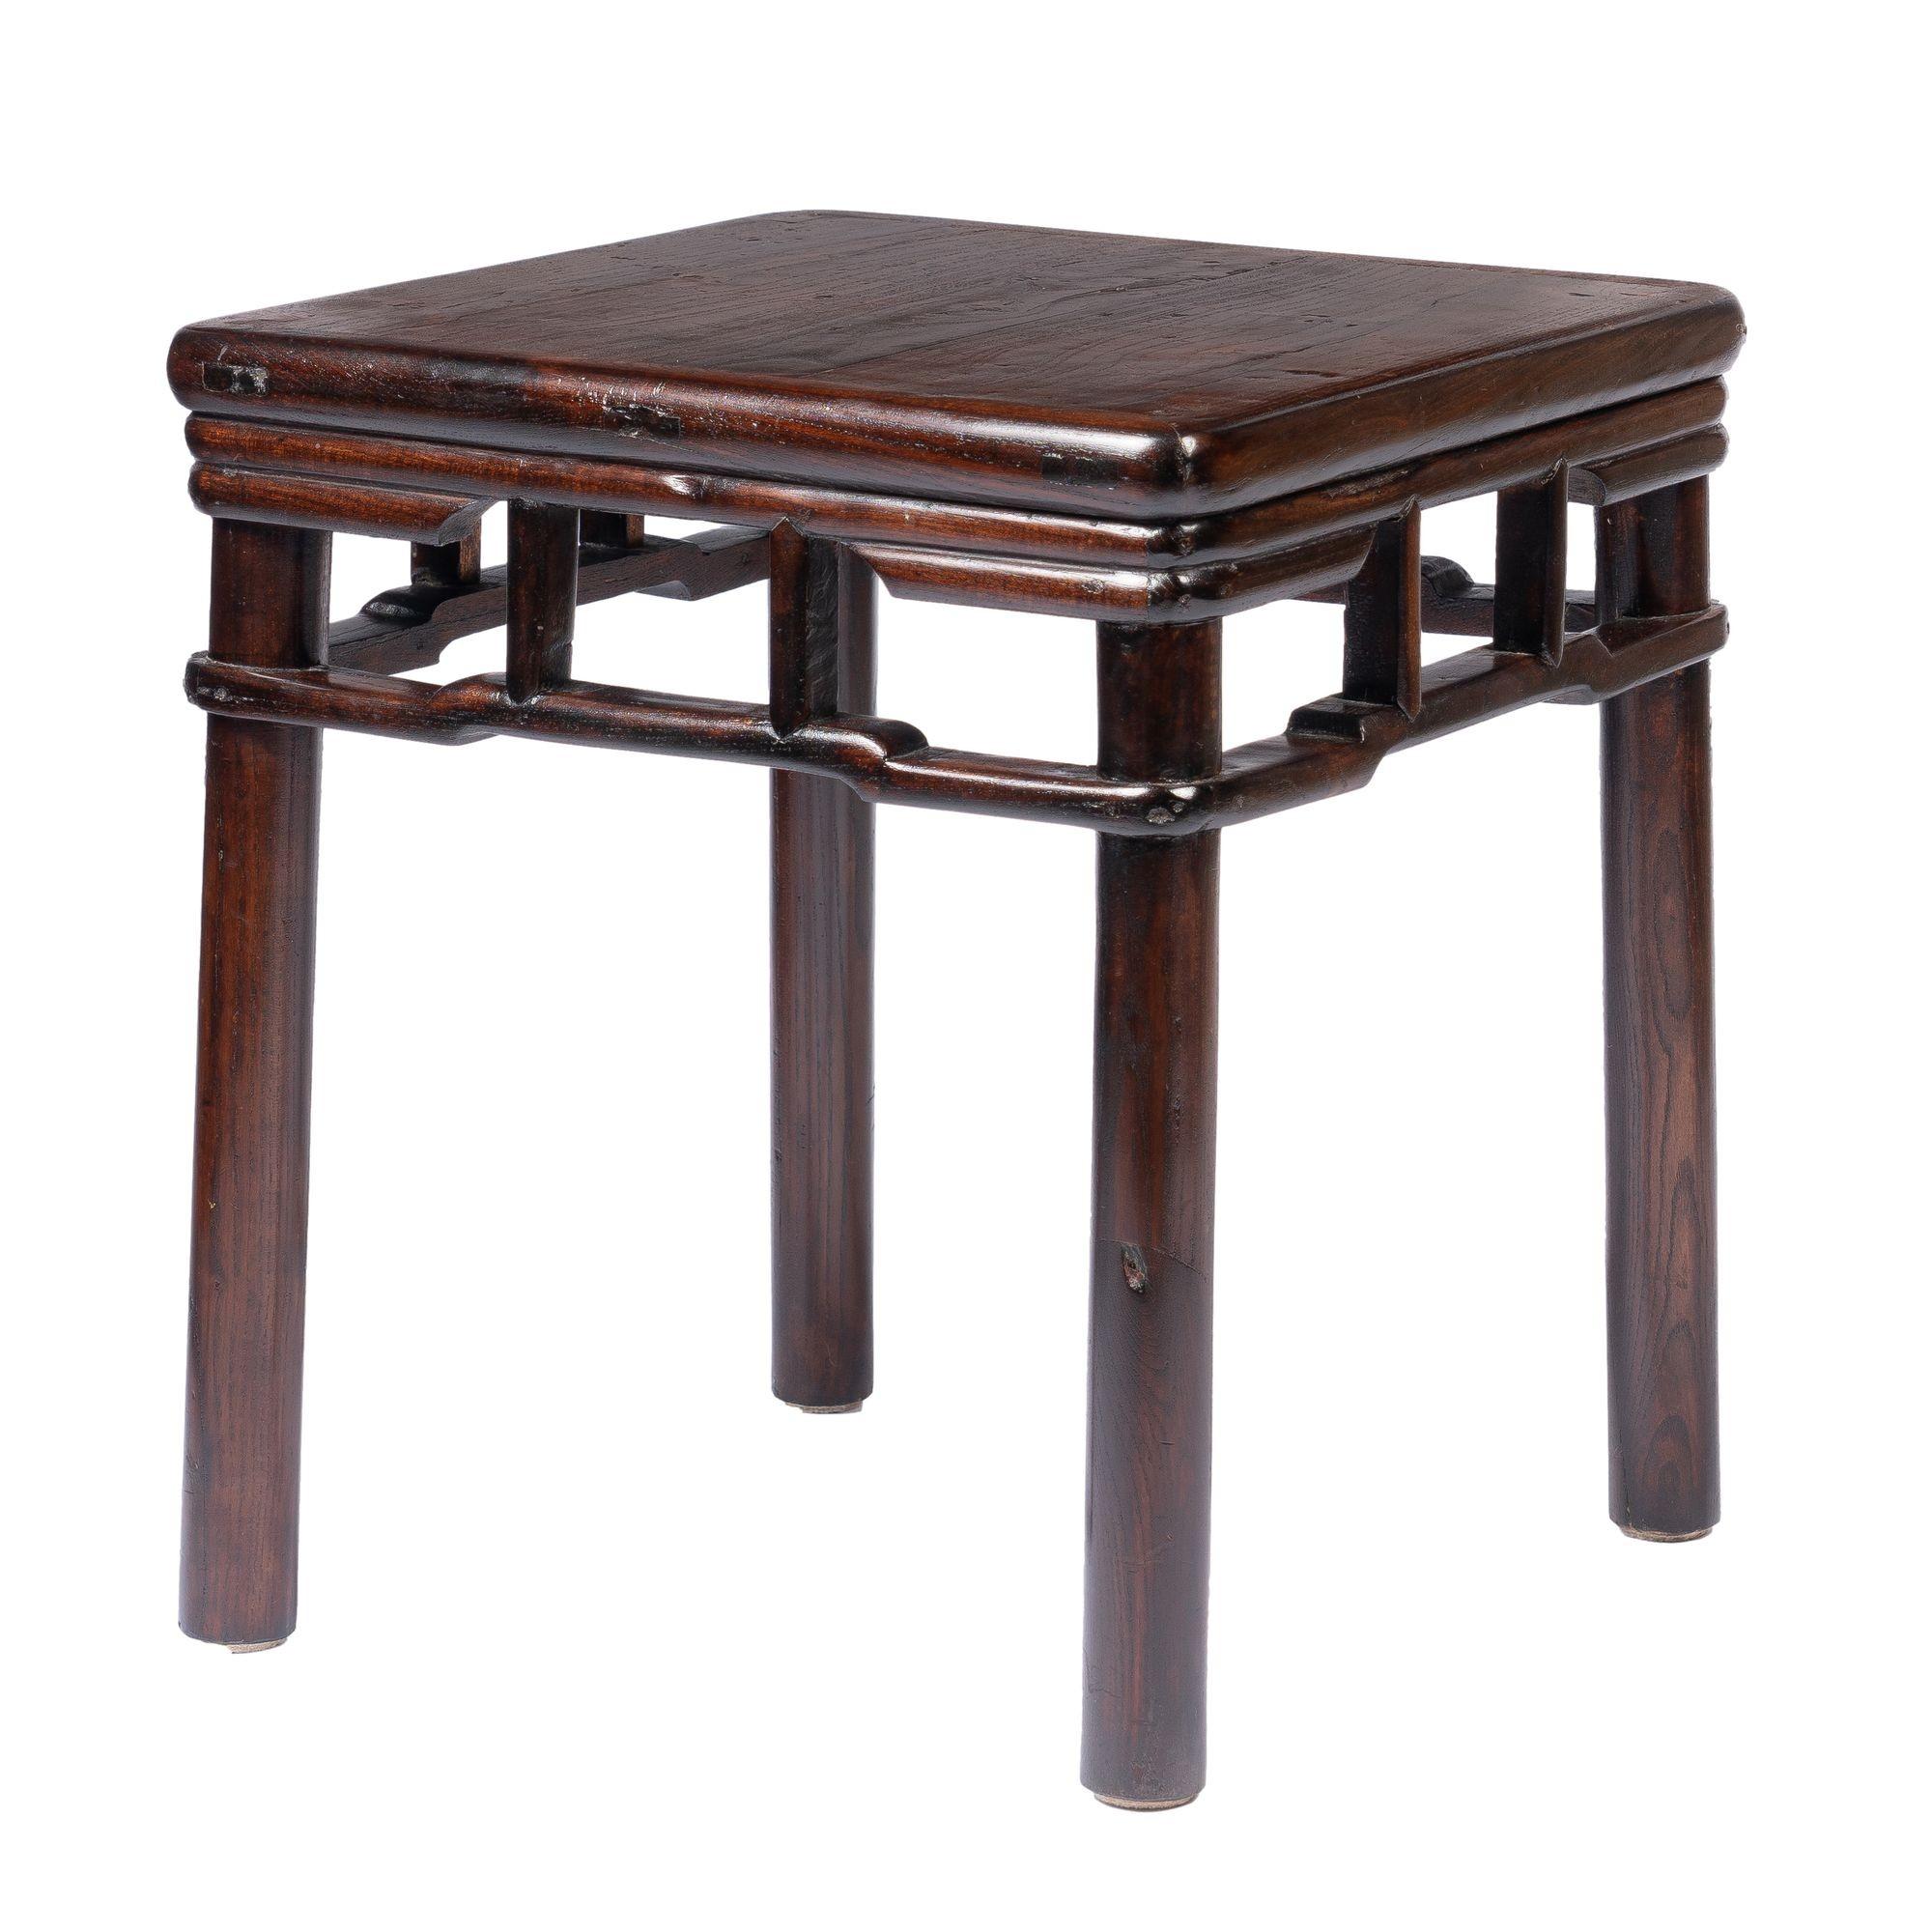 Pair of Chinese Elm Stools with Hump Back Rail, 1780-1820 For Sale 2